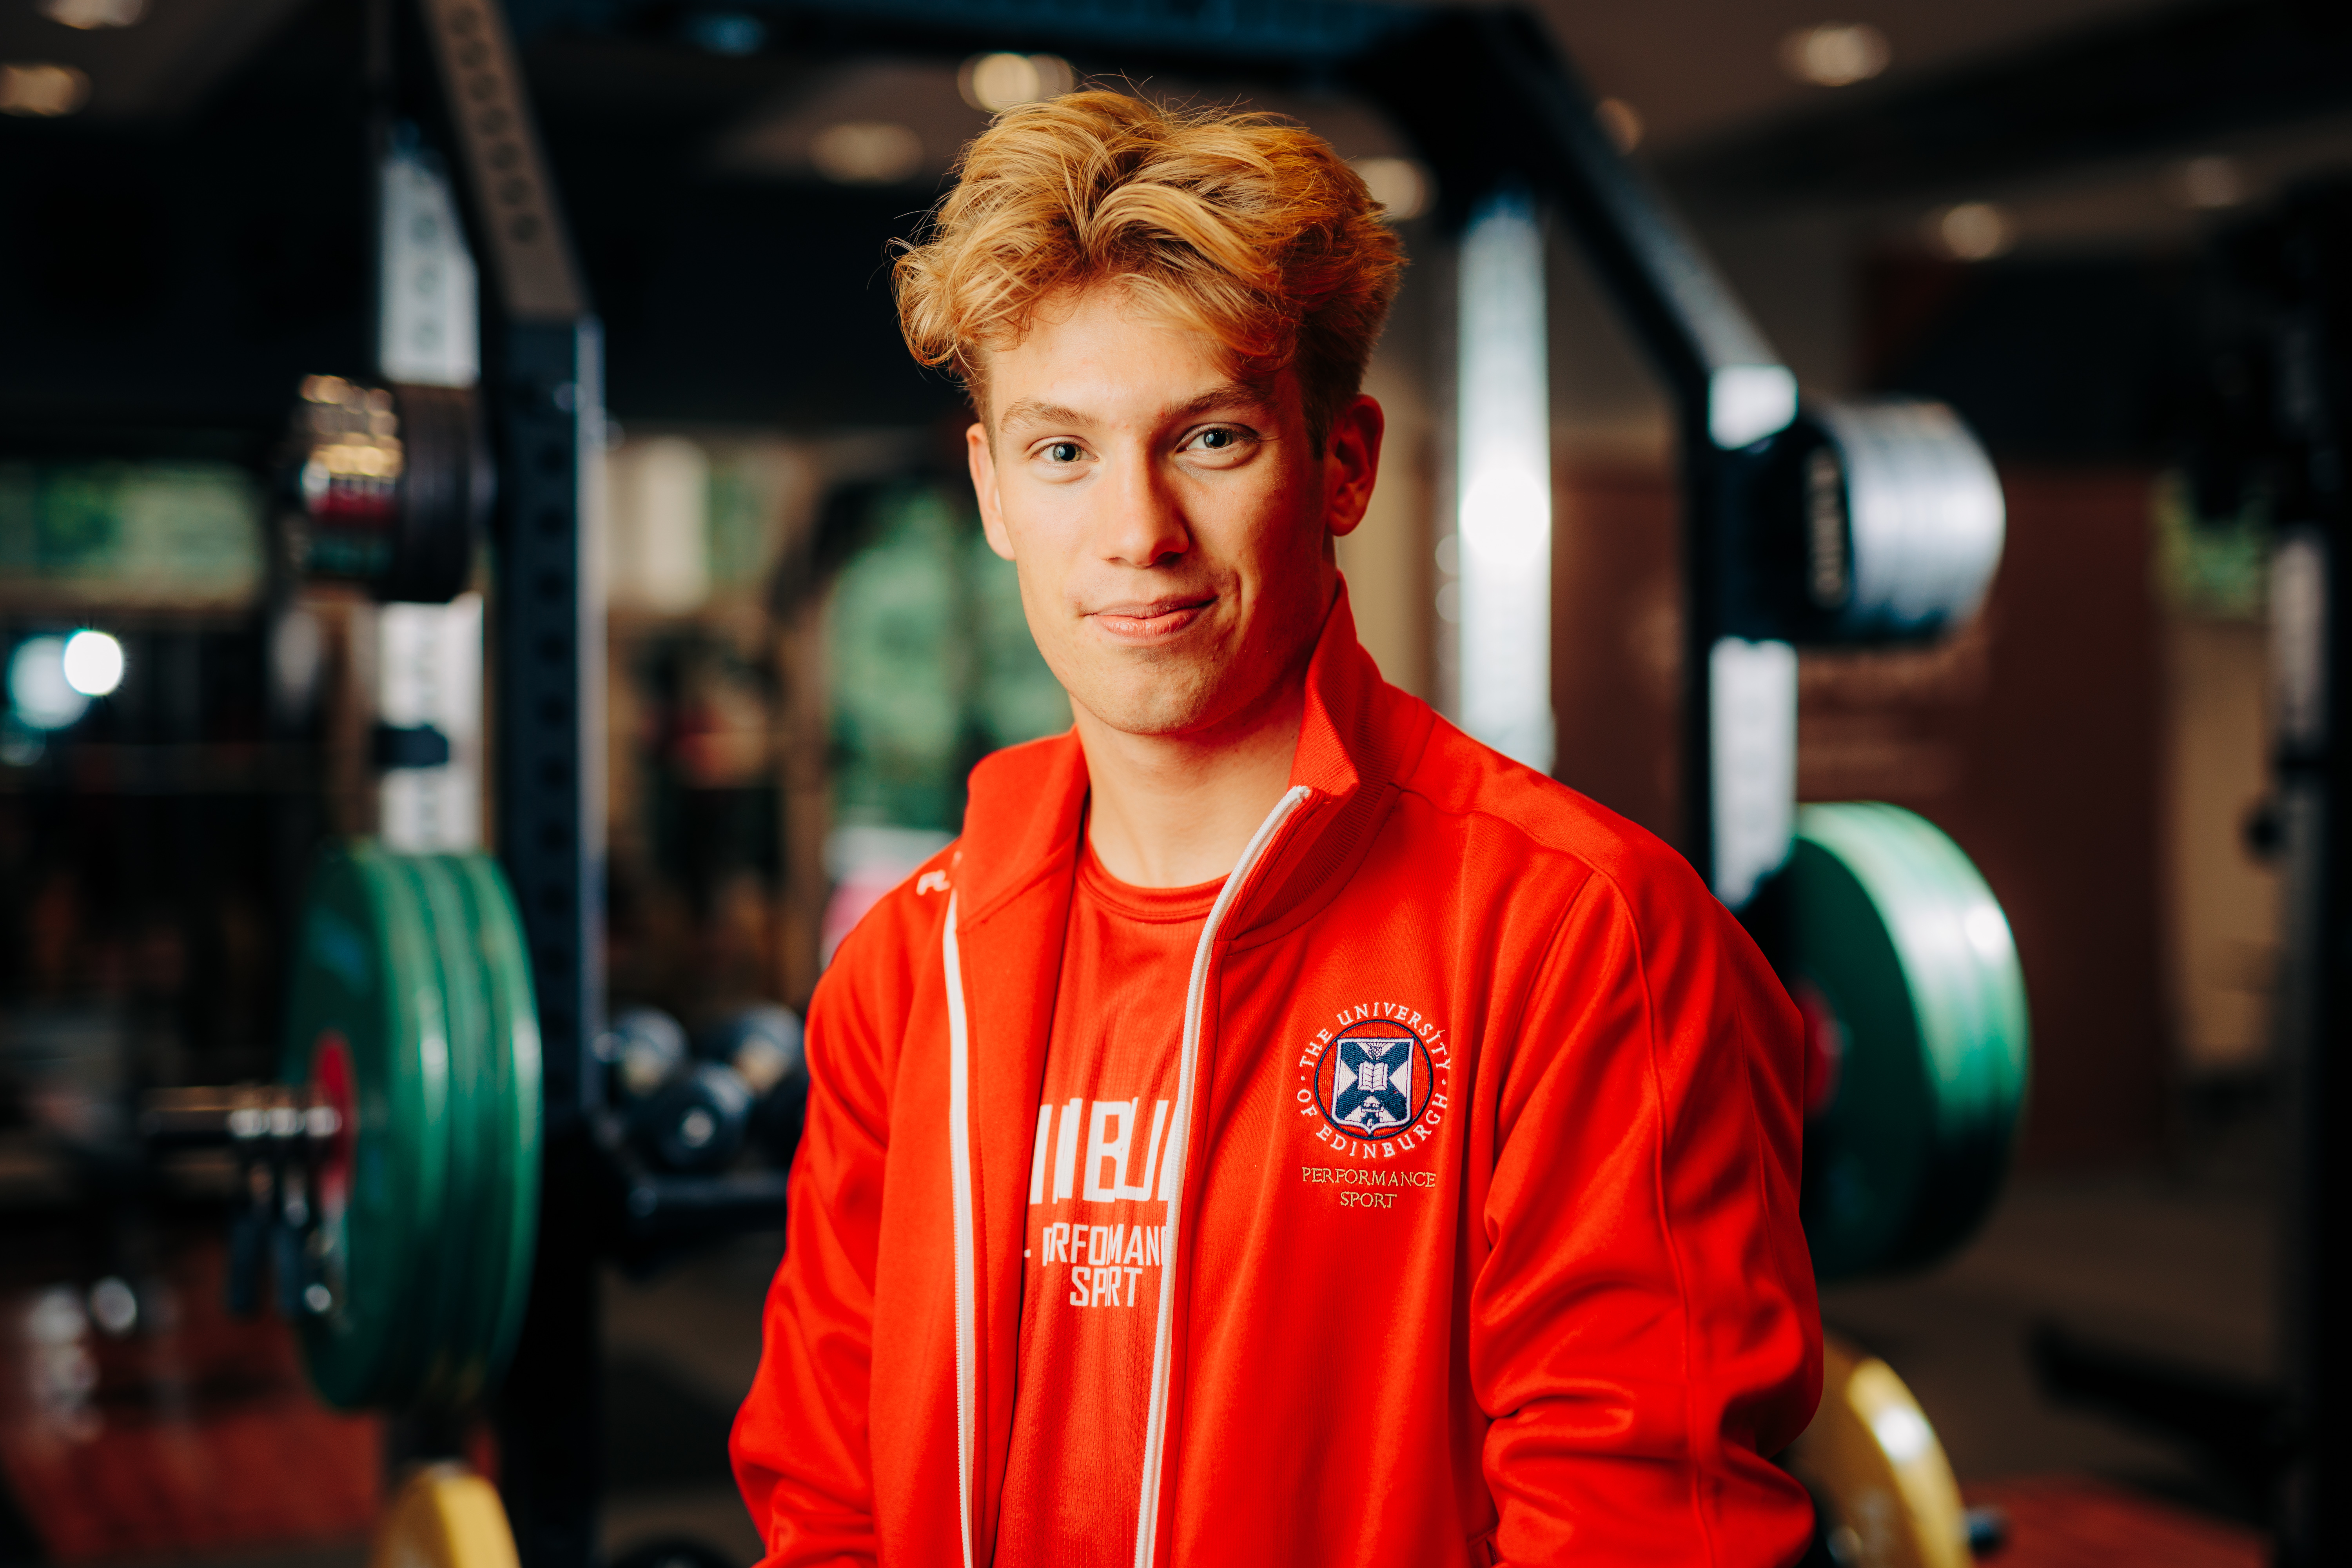 Image of sport scholar Liam Edwards smiling with gym in background